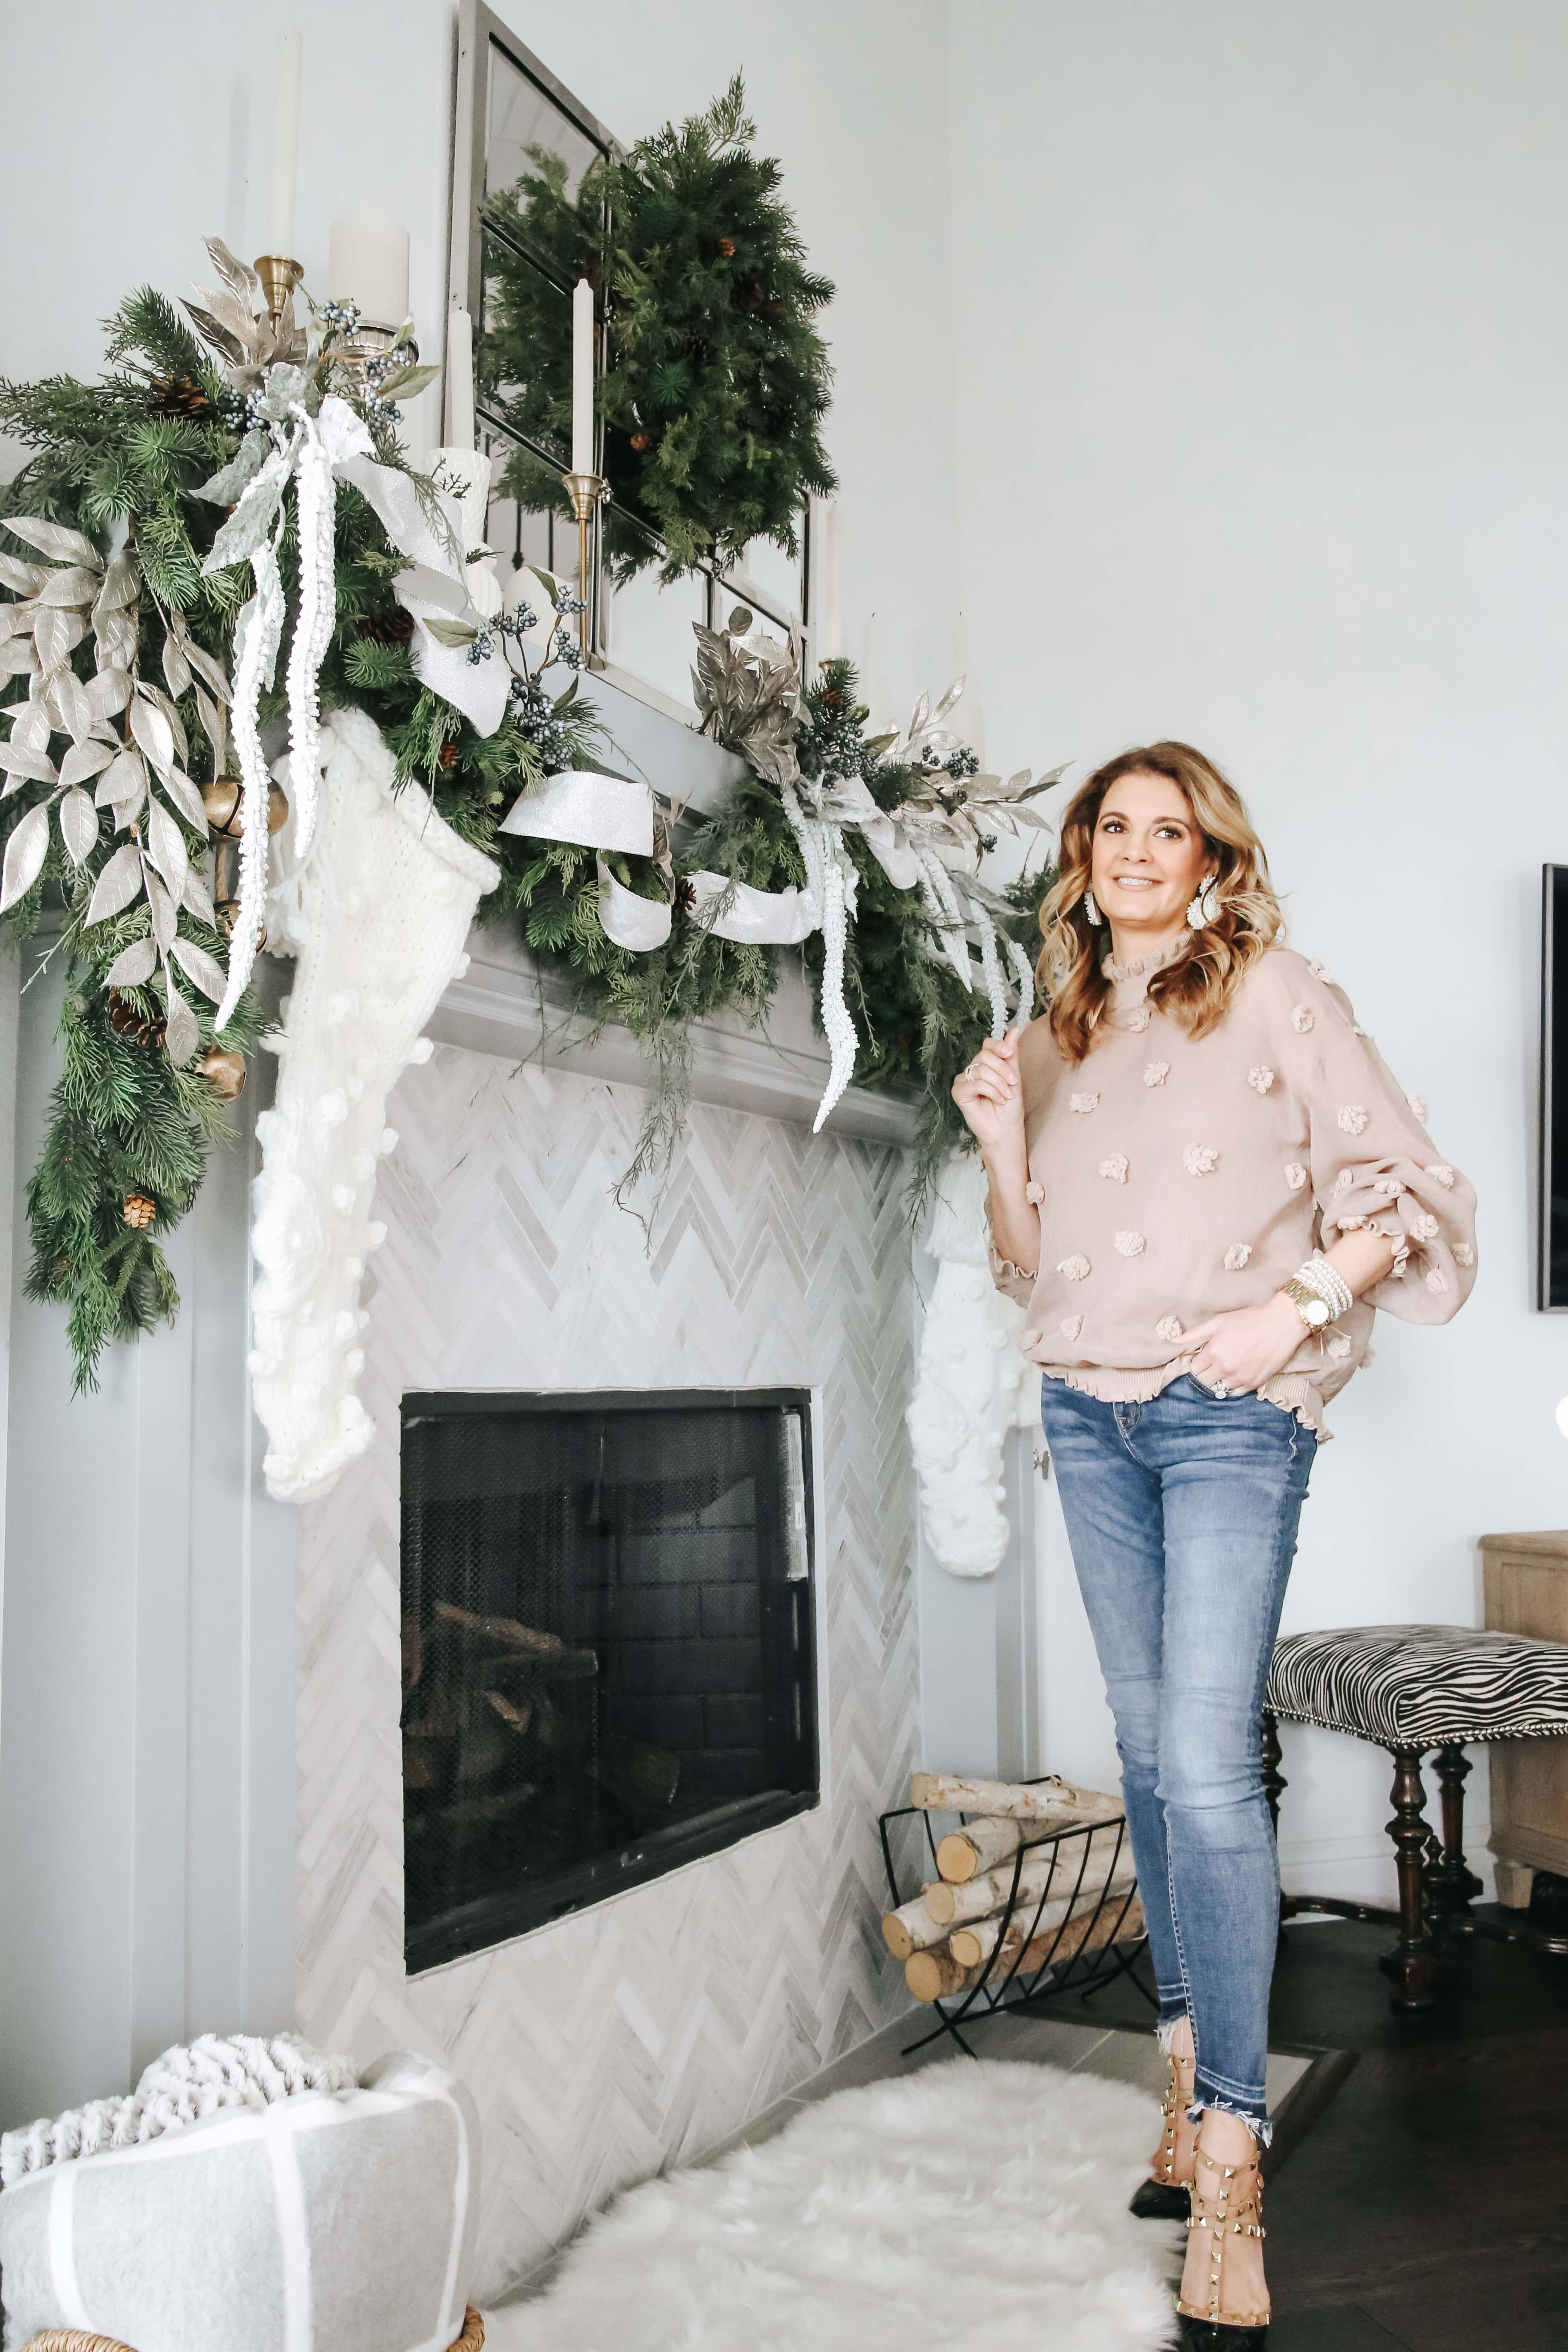 Holiday mantle decorating with soft winter white accents and evergreen details. #ABlissfulNest #christmasmantle #christmasdecoratingideas